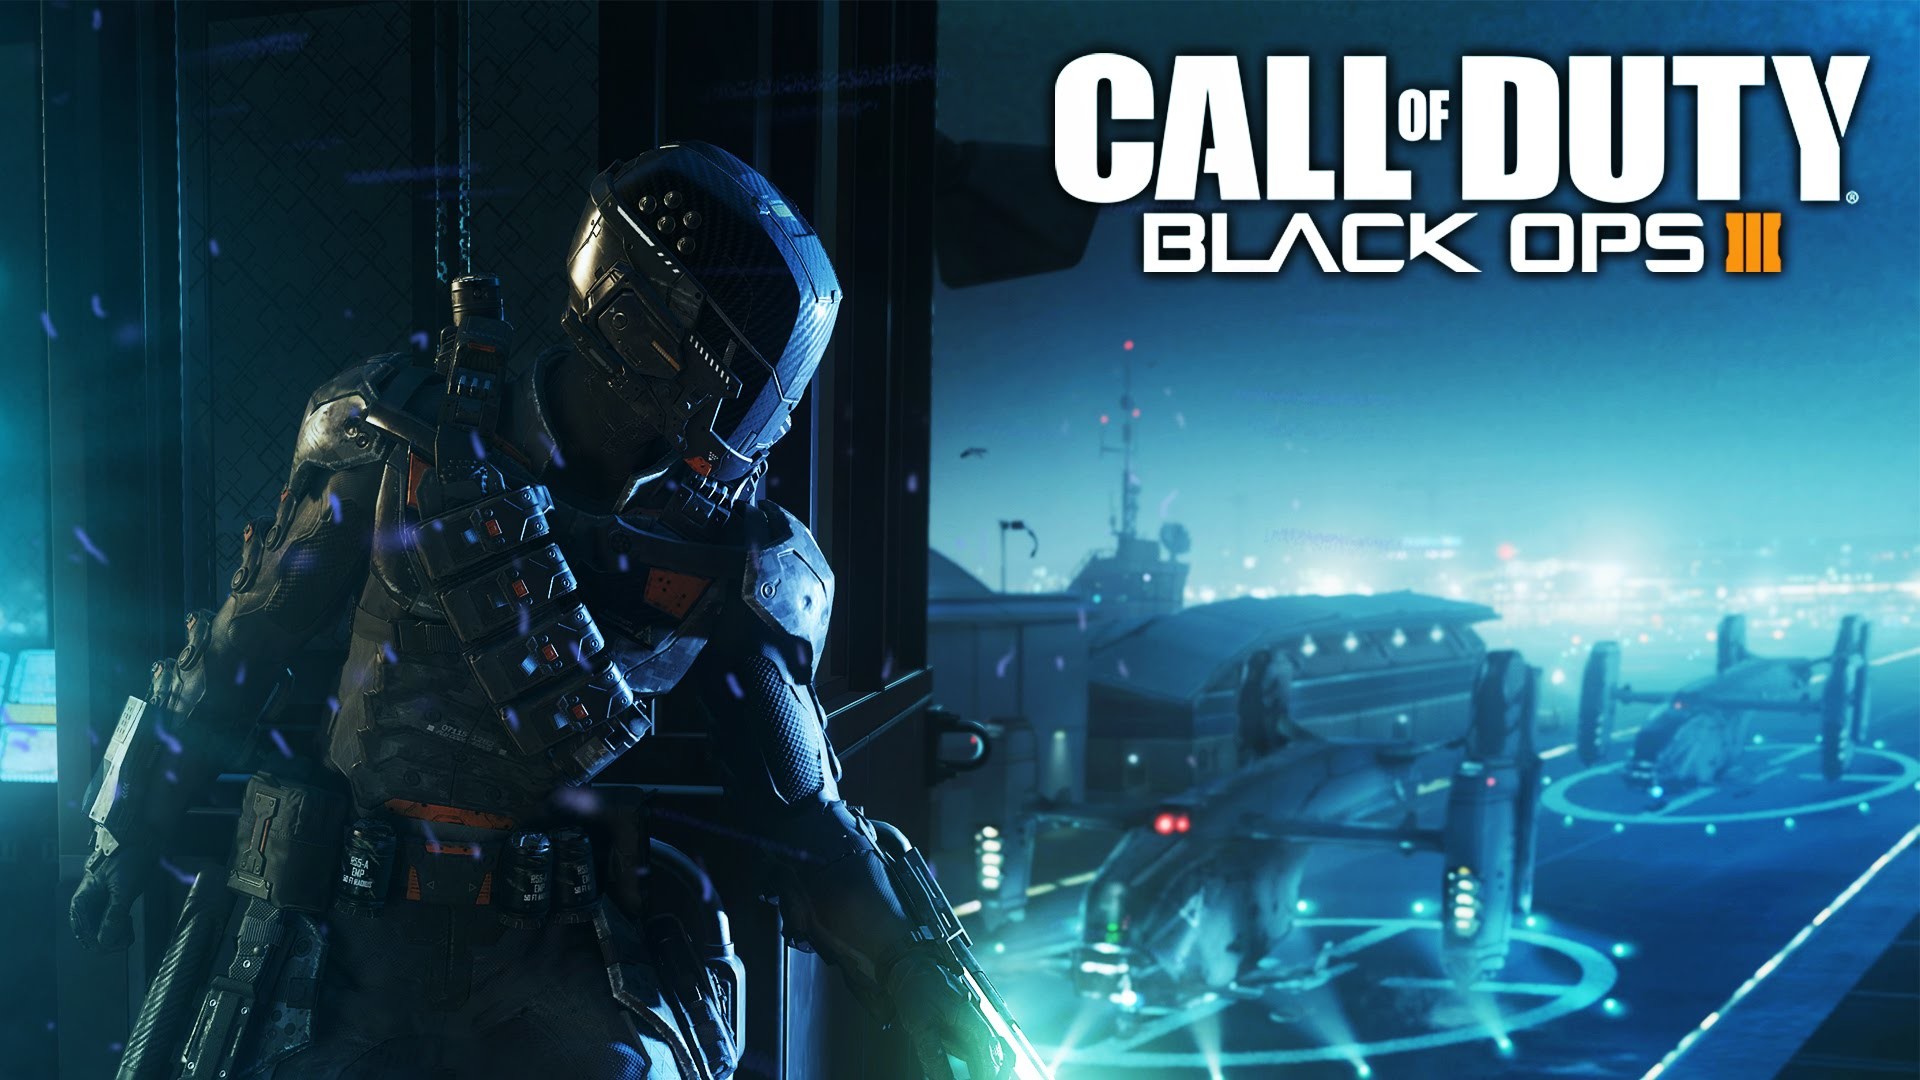 Call of Duty Black Ops III Wallpapers (83+ pictures)